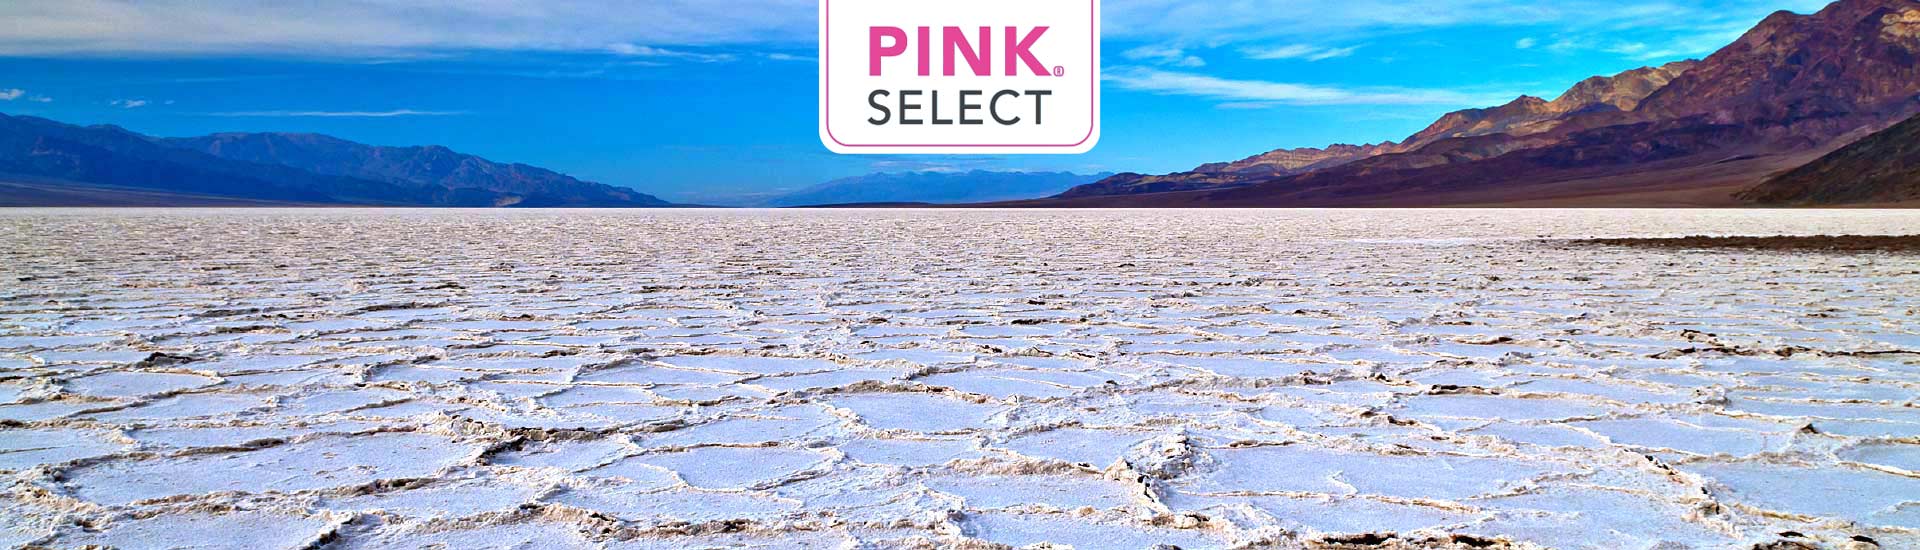 Pink Select Death Valley premium journey tour header image with logo.